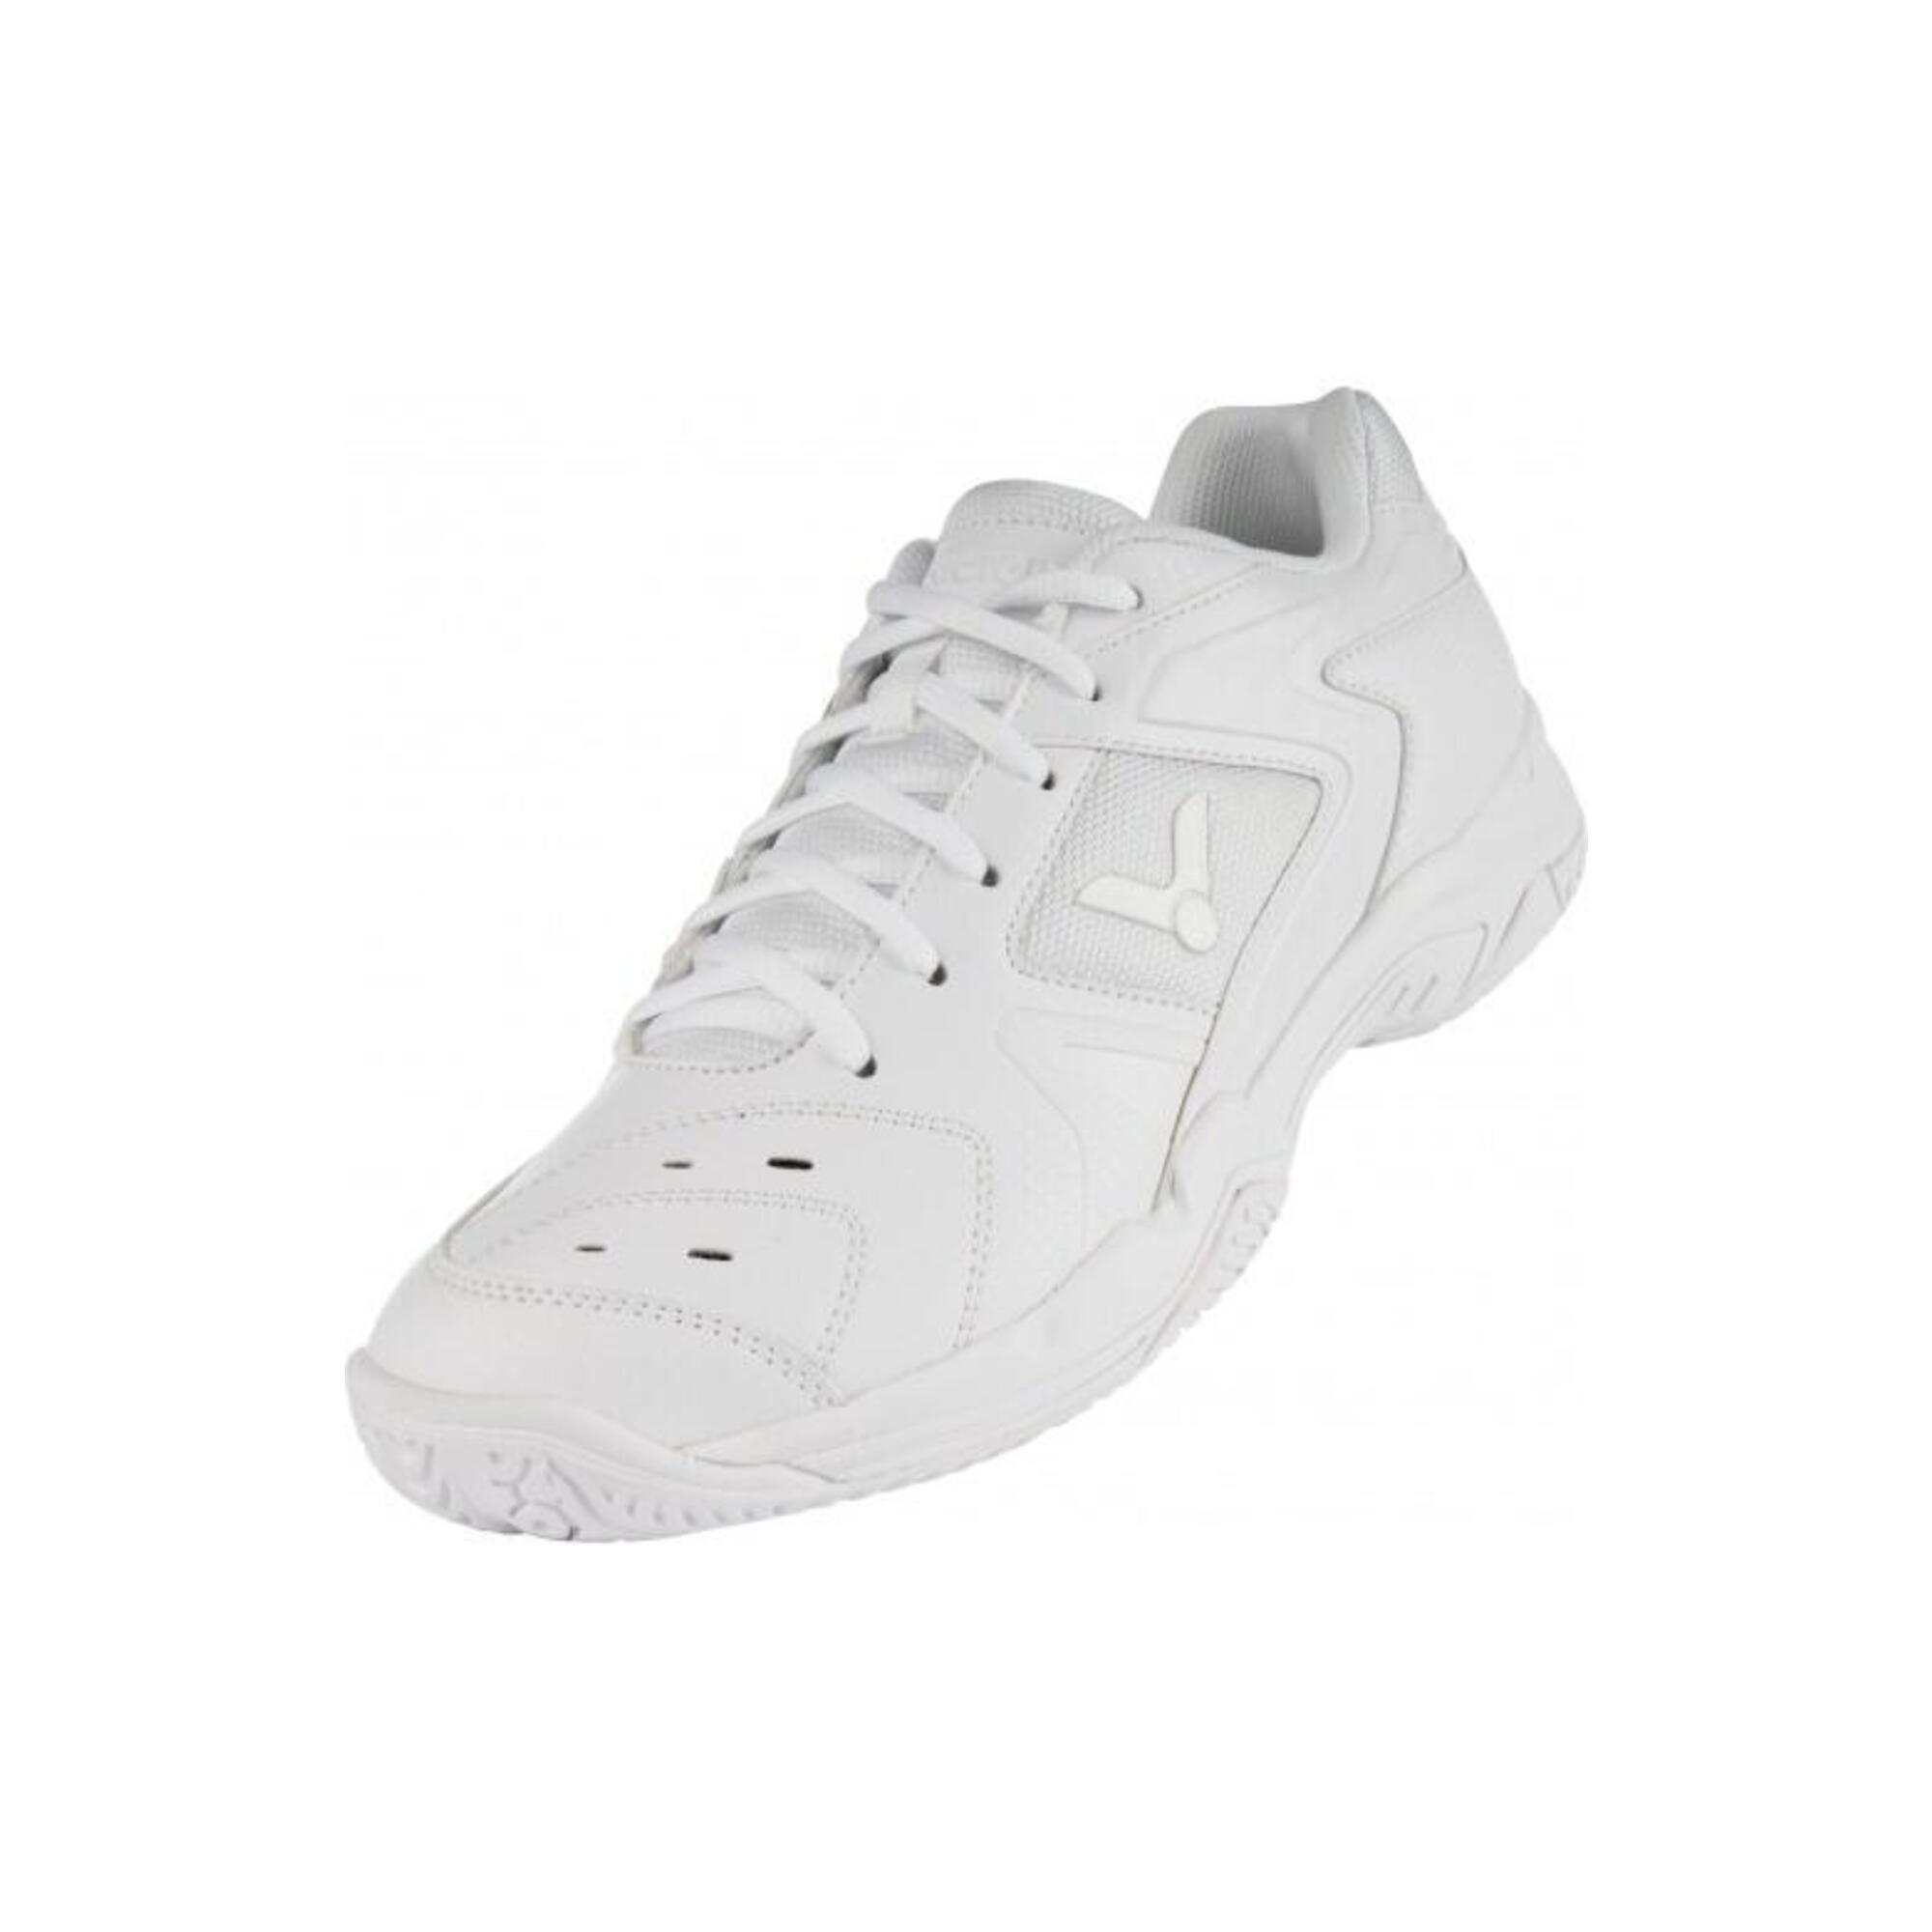 VICTOR Victor P9200TD A WHITE Badminton shoes